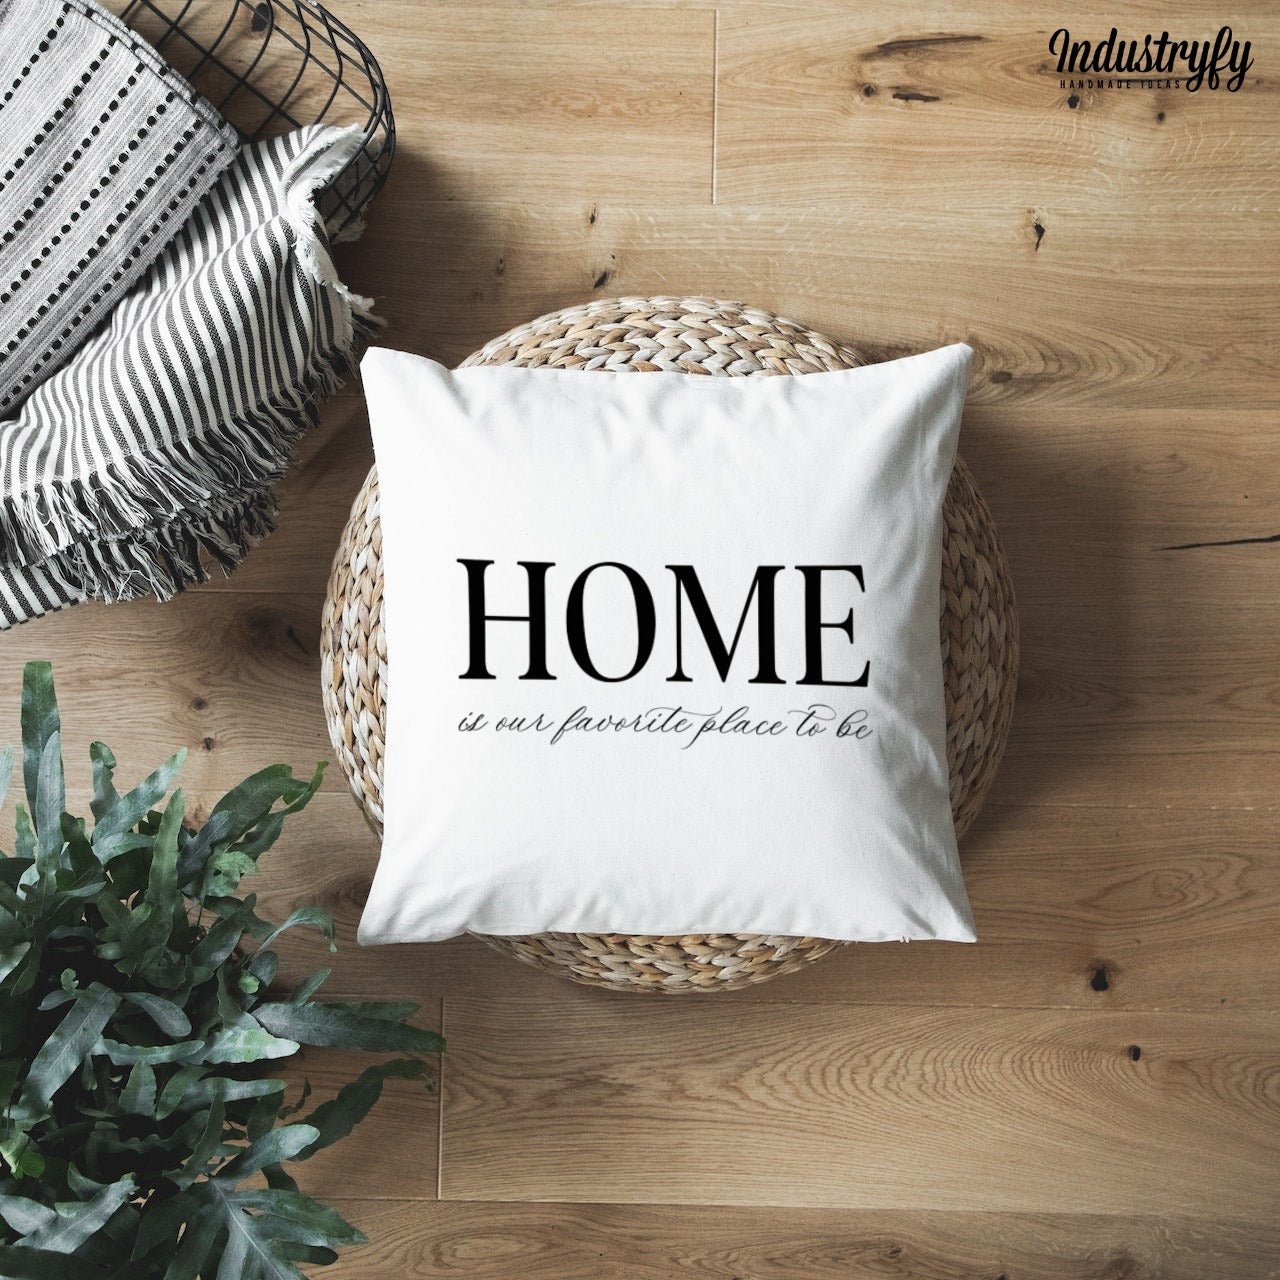 be | Industryfy place favorite – Home is to Kissenhülle our